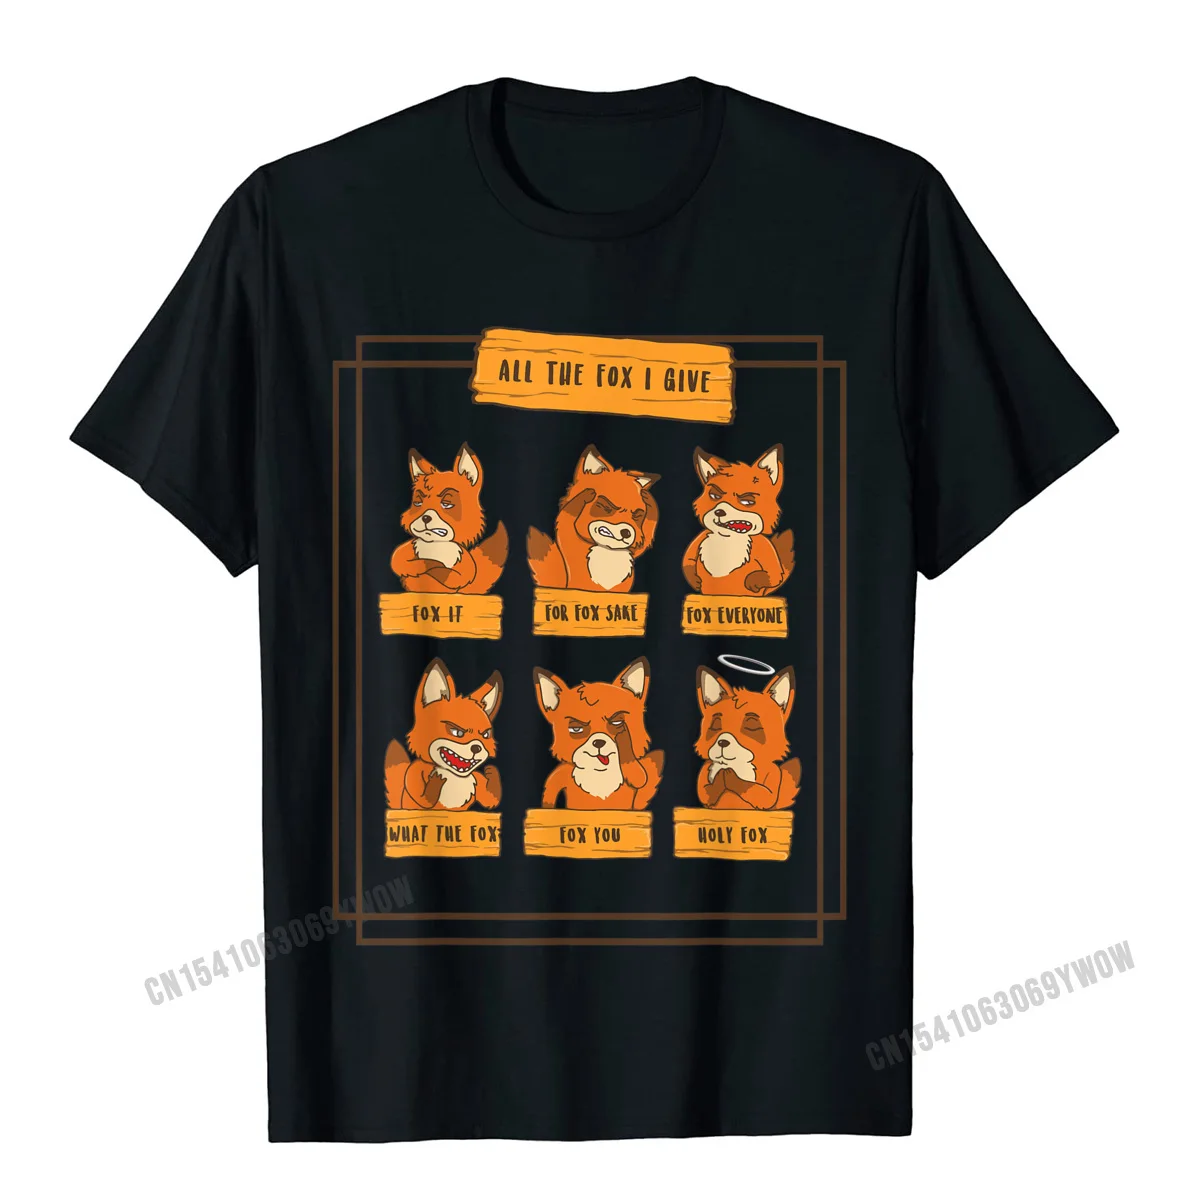 All The Fox I Give Funny No Fox Given Quotes Gift T-Shirt Camisas Men Custom T Shirt For Men Cotton T Shirt Party Hip Hop